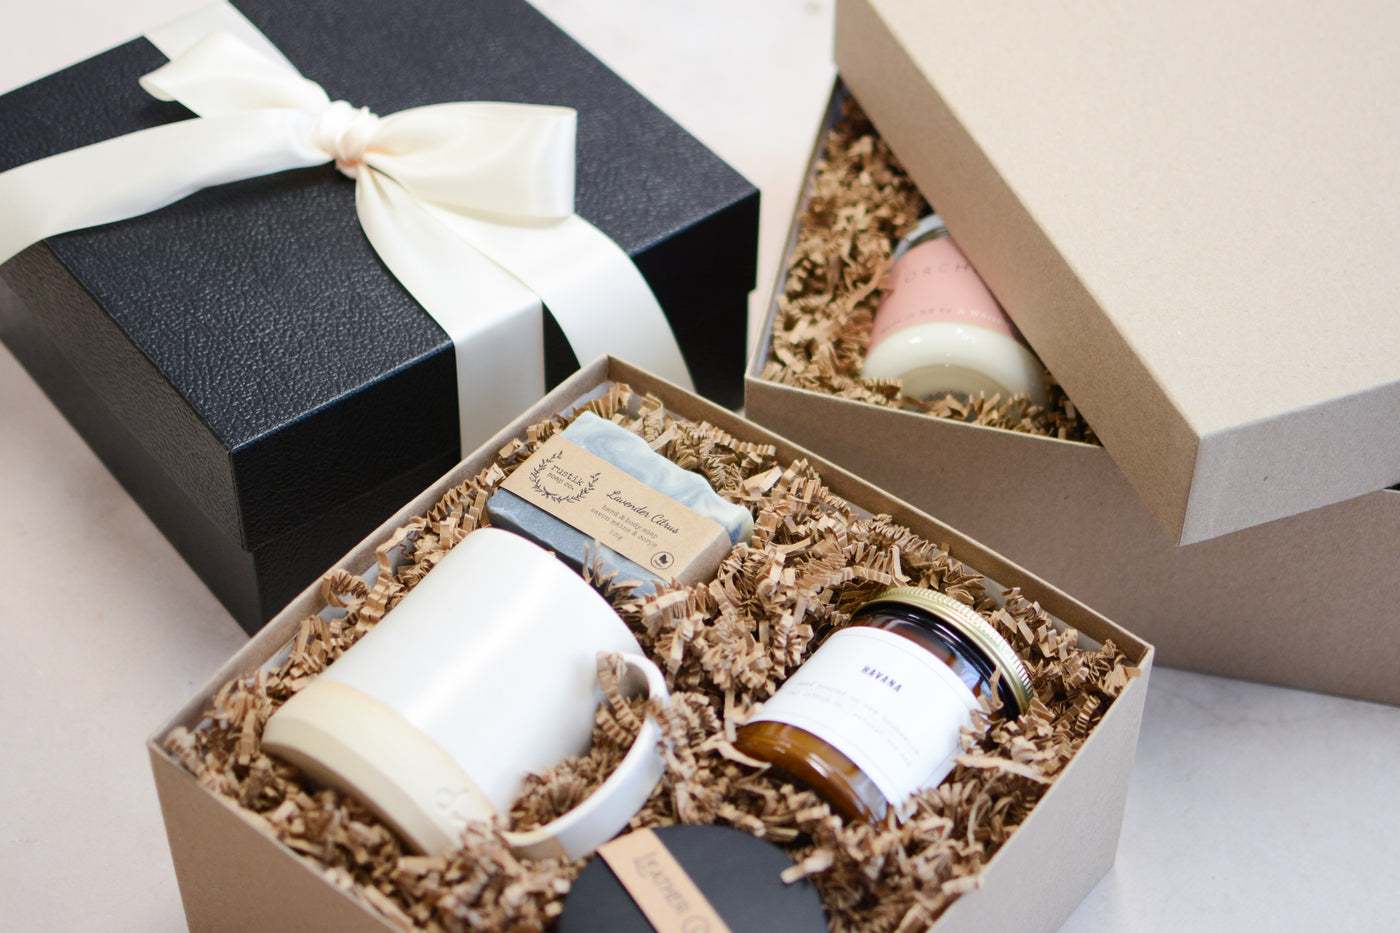 Shop Our Best Gift Boxes for Her – The Artisan Gift Boxes